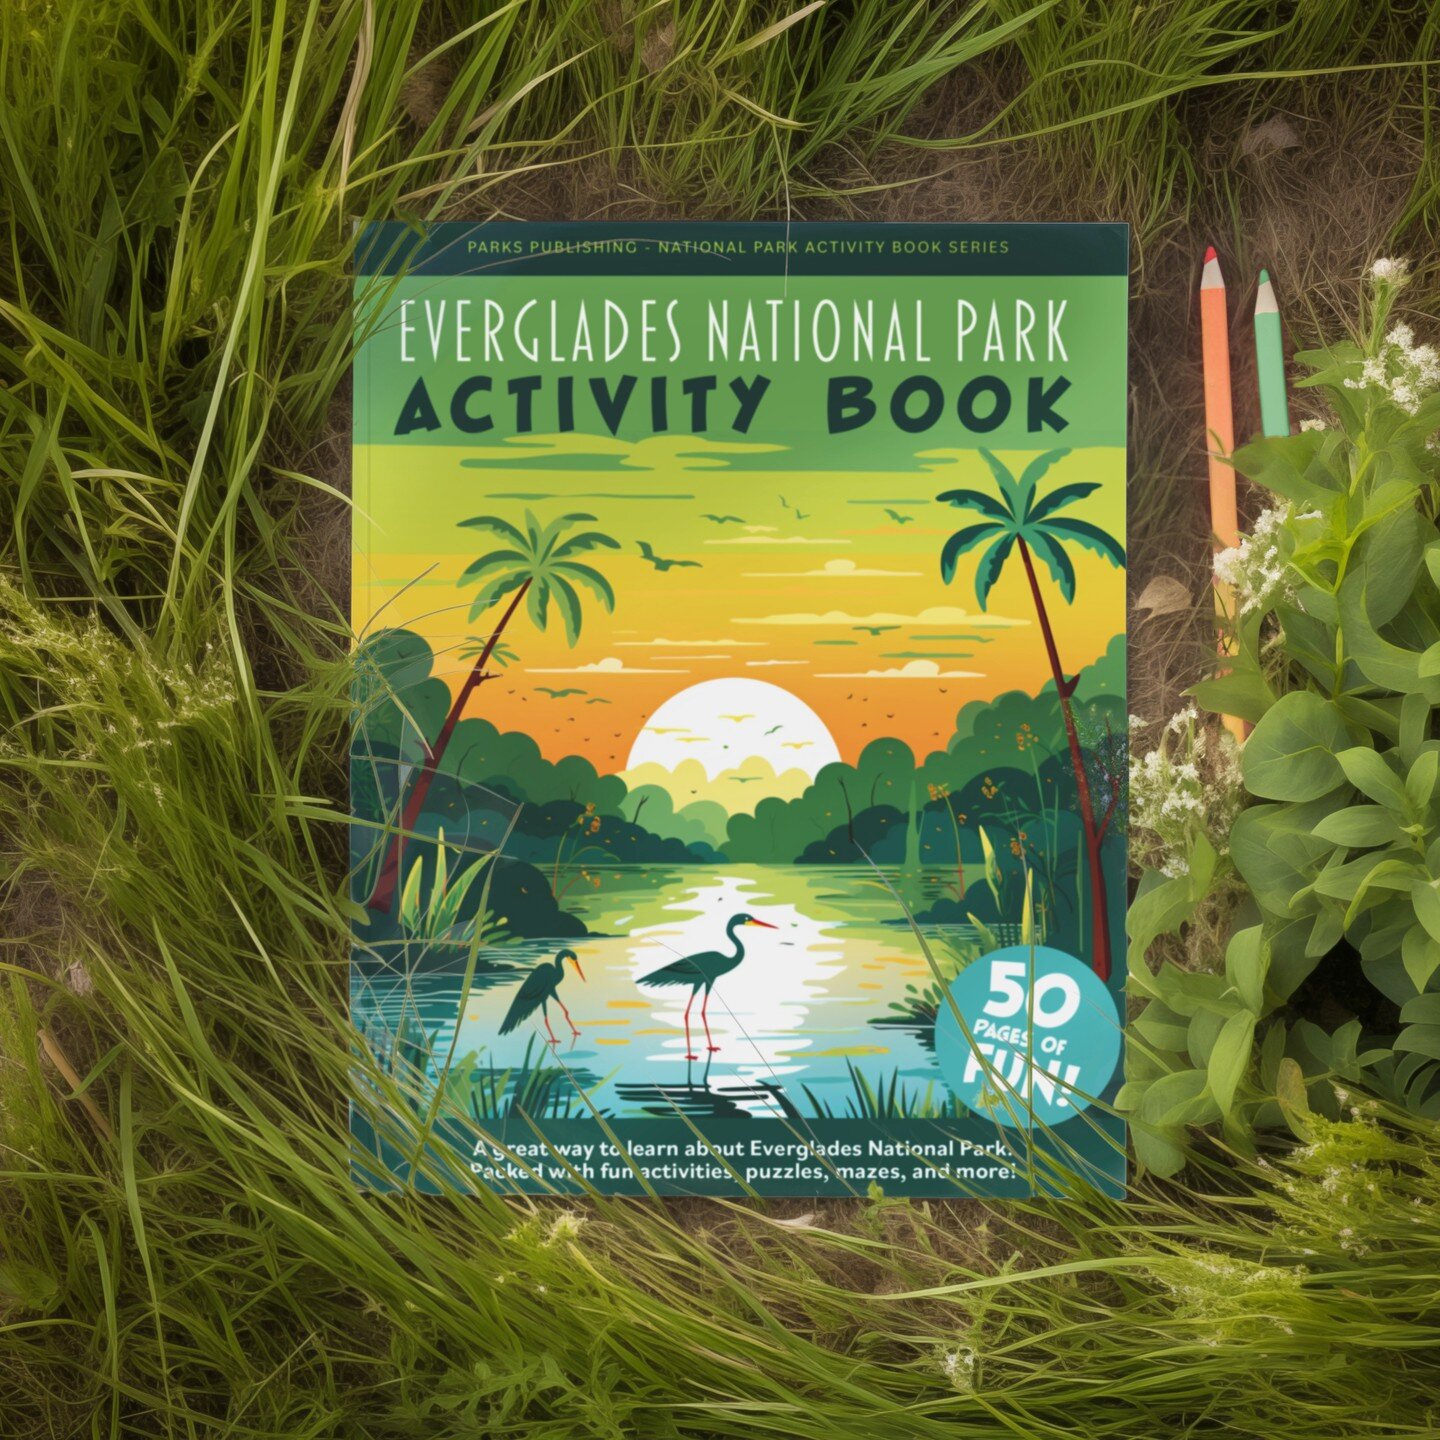 FRESH OFF THE PRESS 🌿📚 Book #3 - our brand new Everglades Activity Book is now available on amazon!! 🐊🌴 Explore the wonders of this unique ecosystem on every page. Bursting with fascinating facts, exciting games, and stunning illustrations, it's 